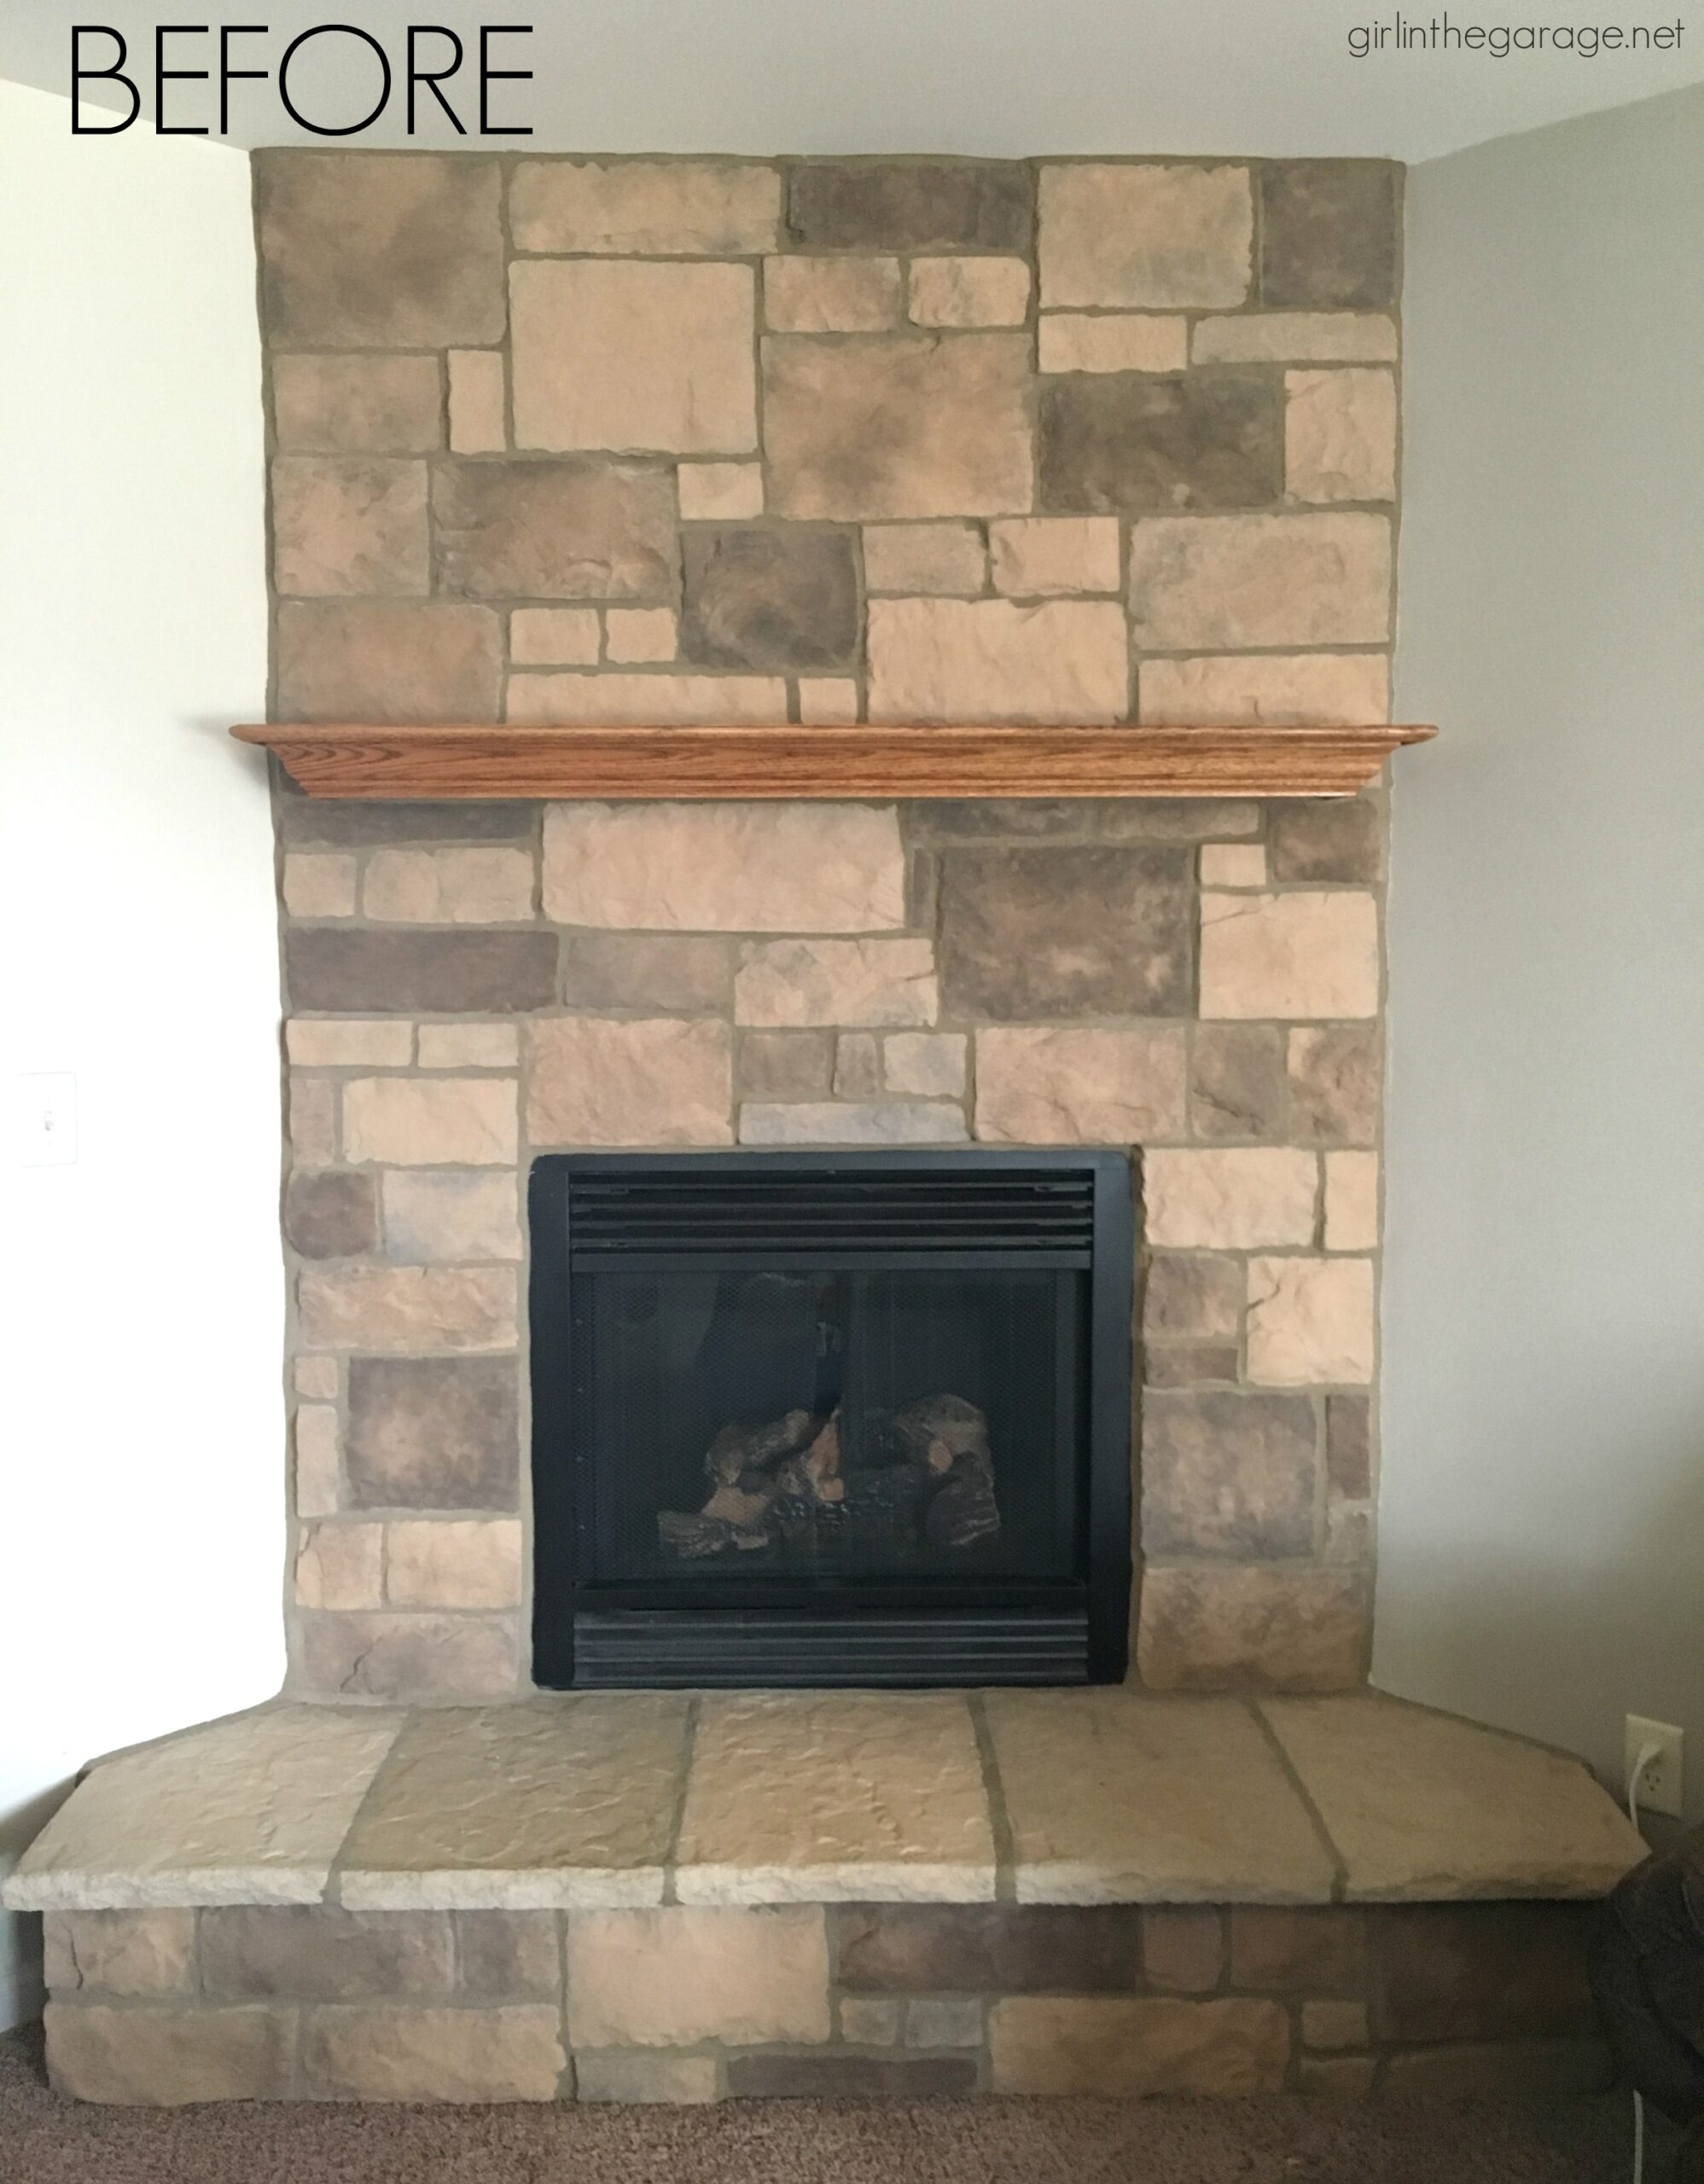 How to easily paint a stone fireplace white with helpful Purdy products meant for rough surfaces. #ad DIY makeover ideas by Girl in the Garage